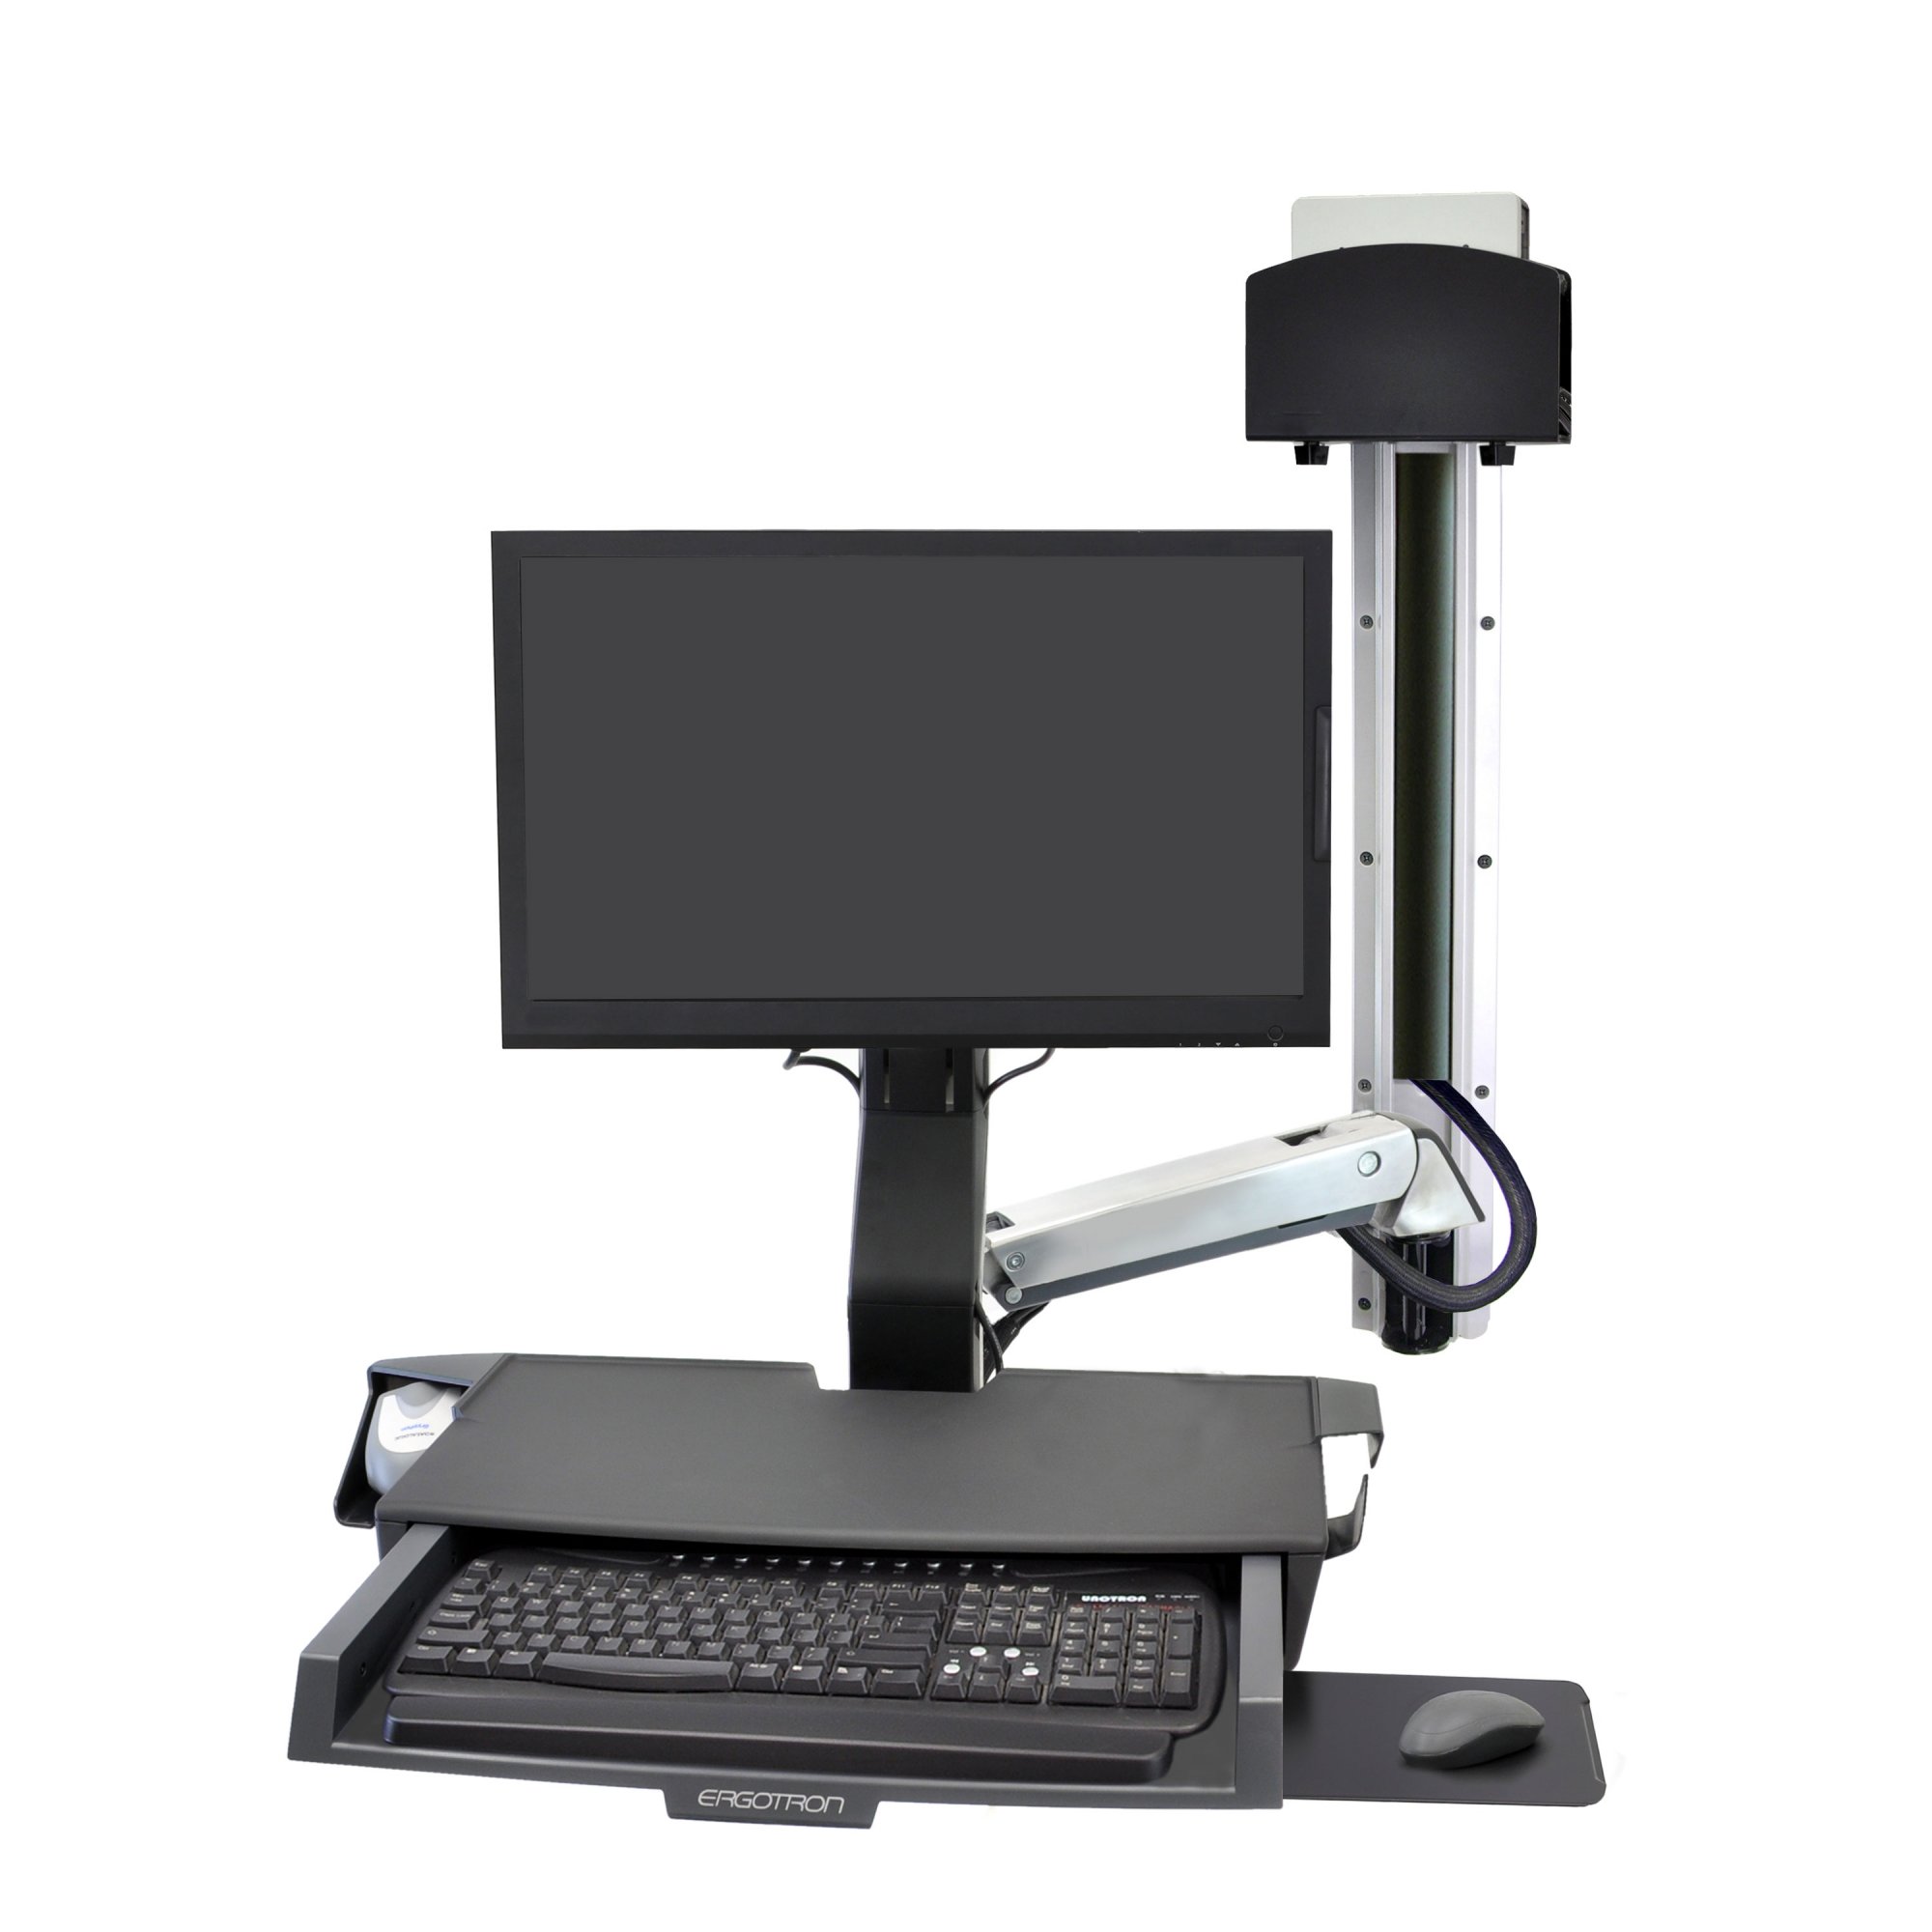 Ergotron 45-594-026 SV Combo System with Worksurface, Small CPU Holder (aluminum)